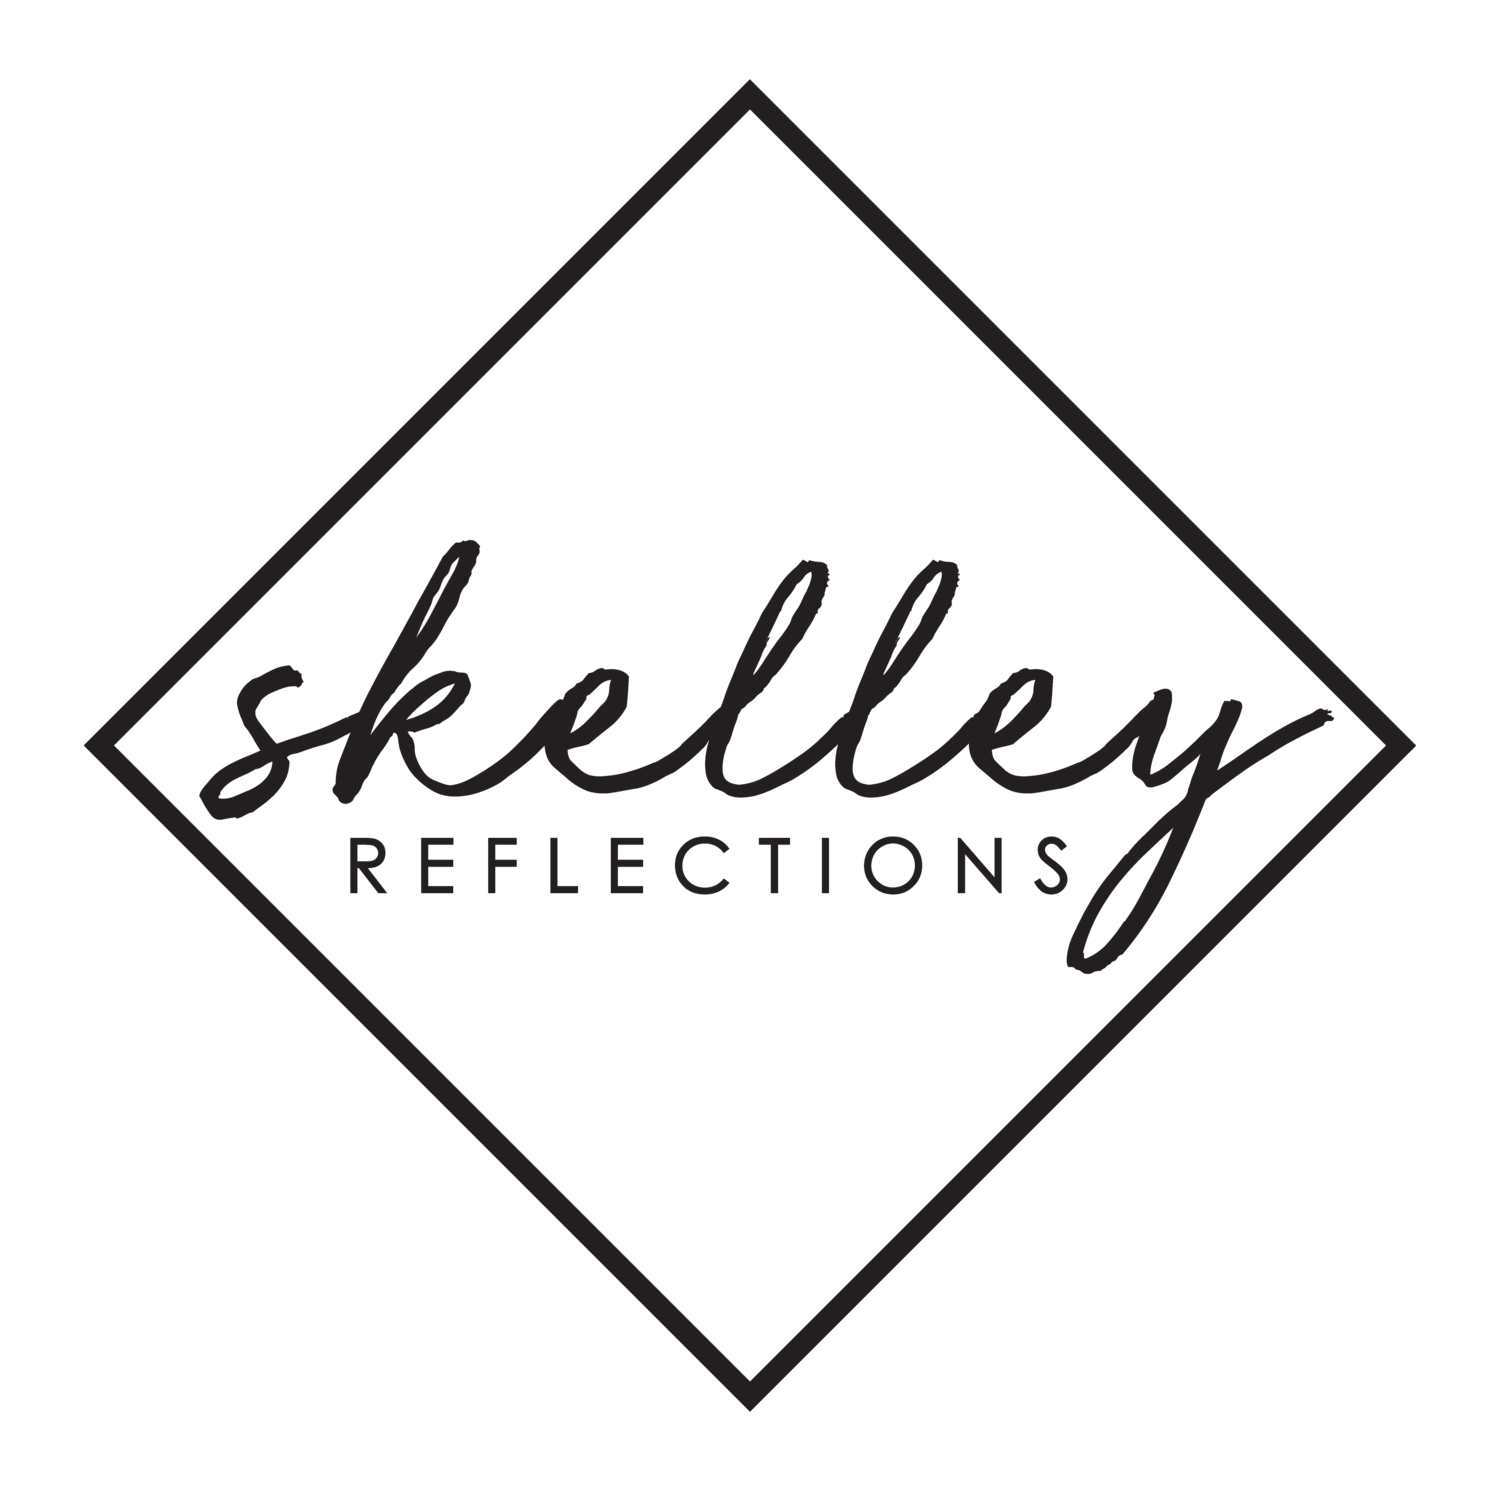 Skelley Reflections